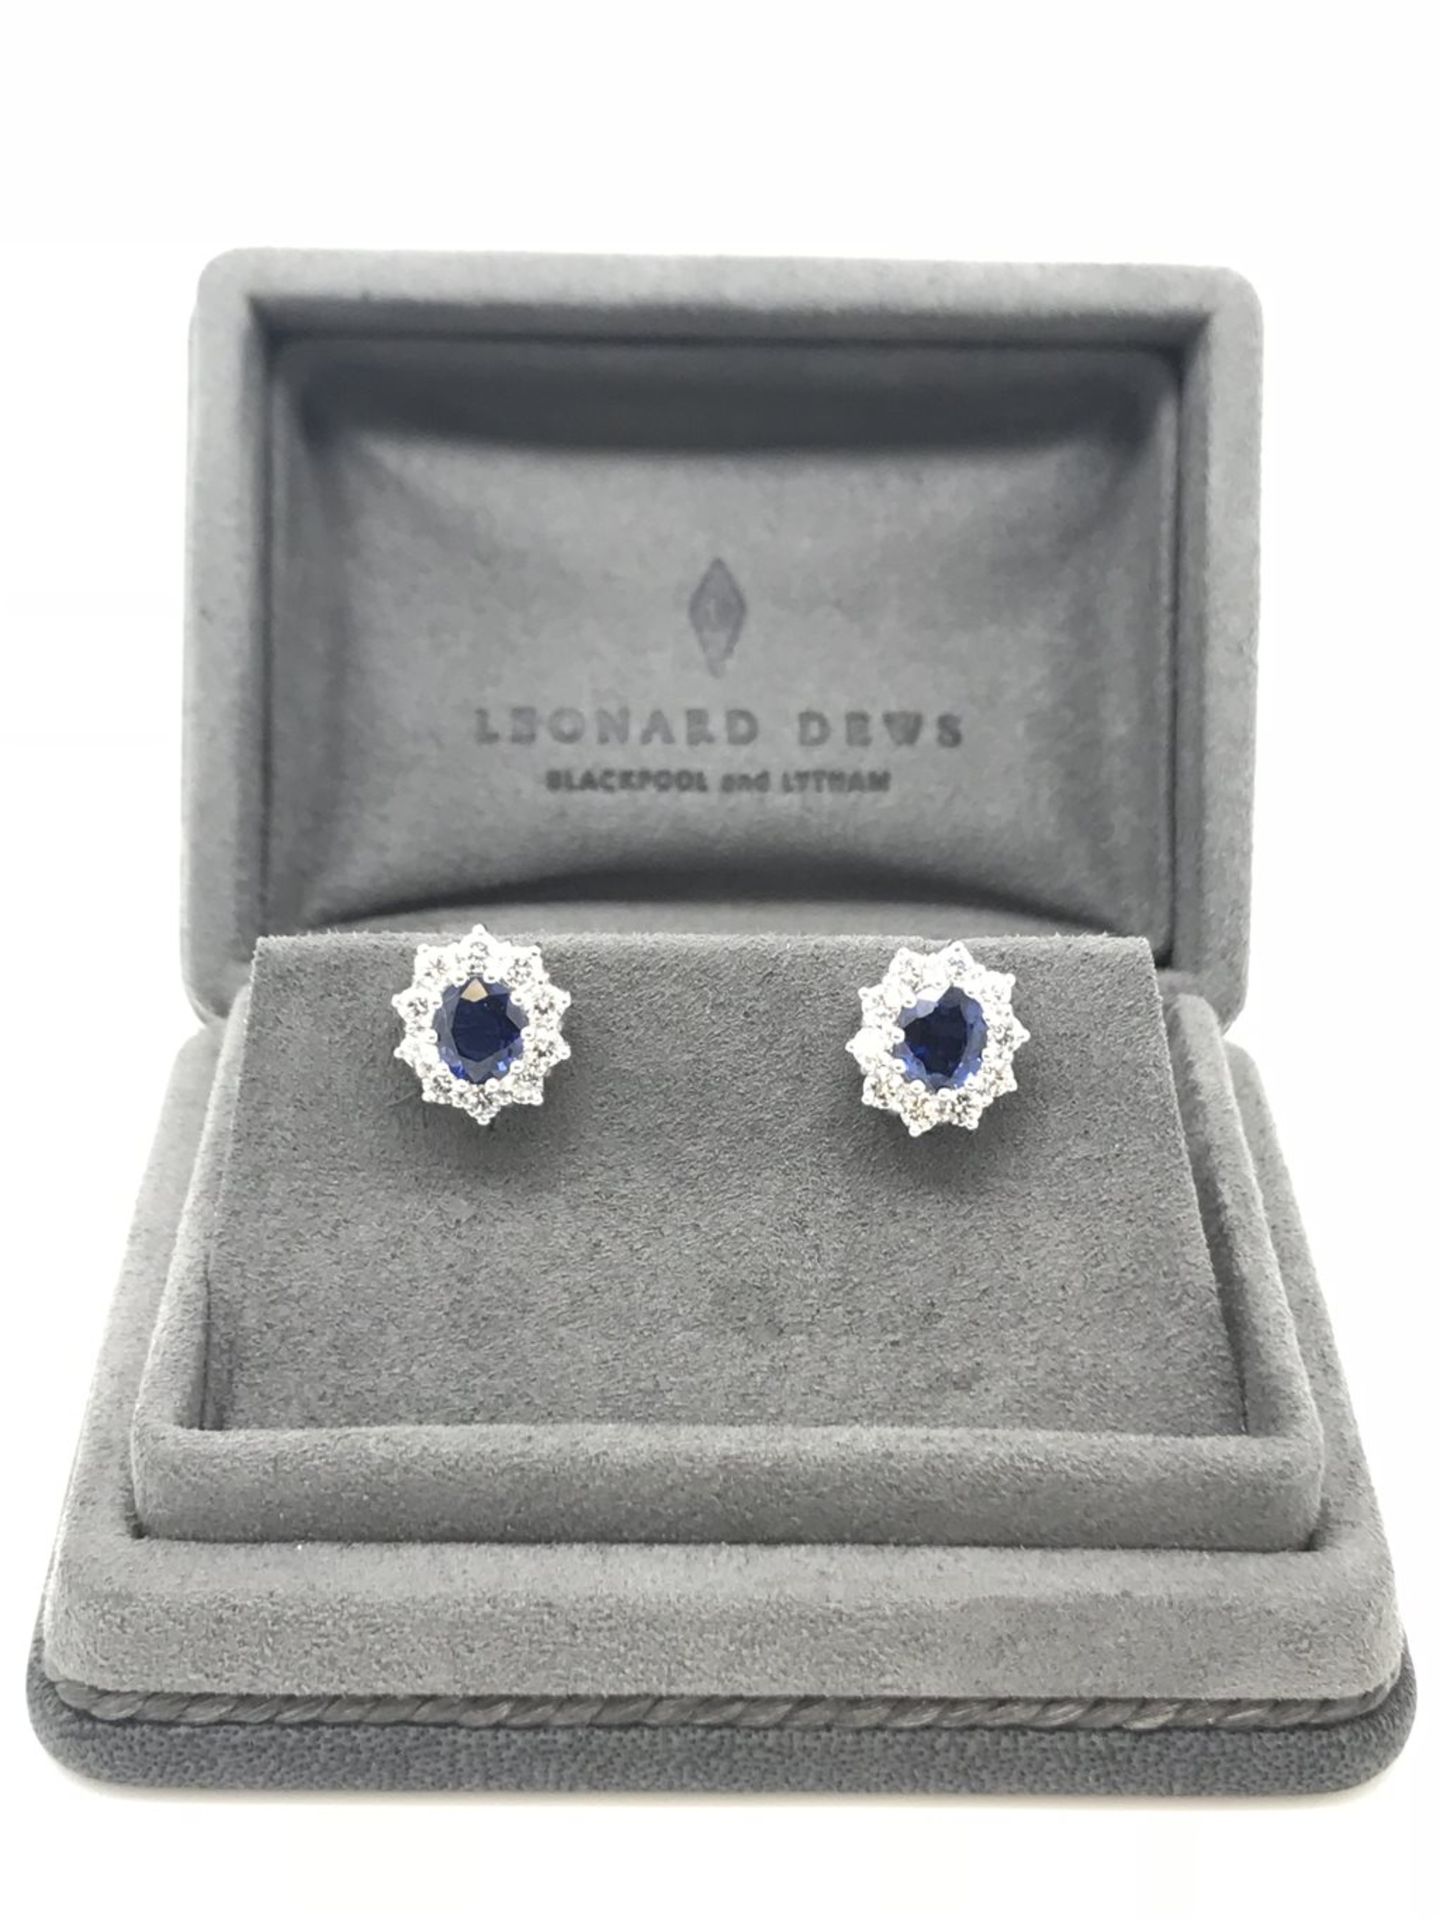 Sapphire & Diamond Cluster Earrings, 18ct Gold - Image 2 of 5